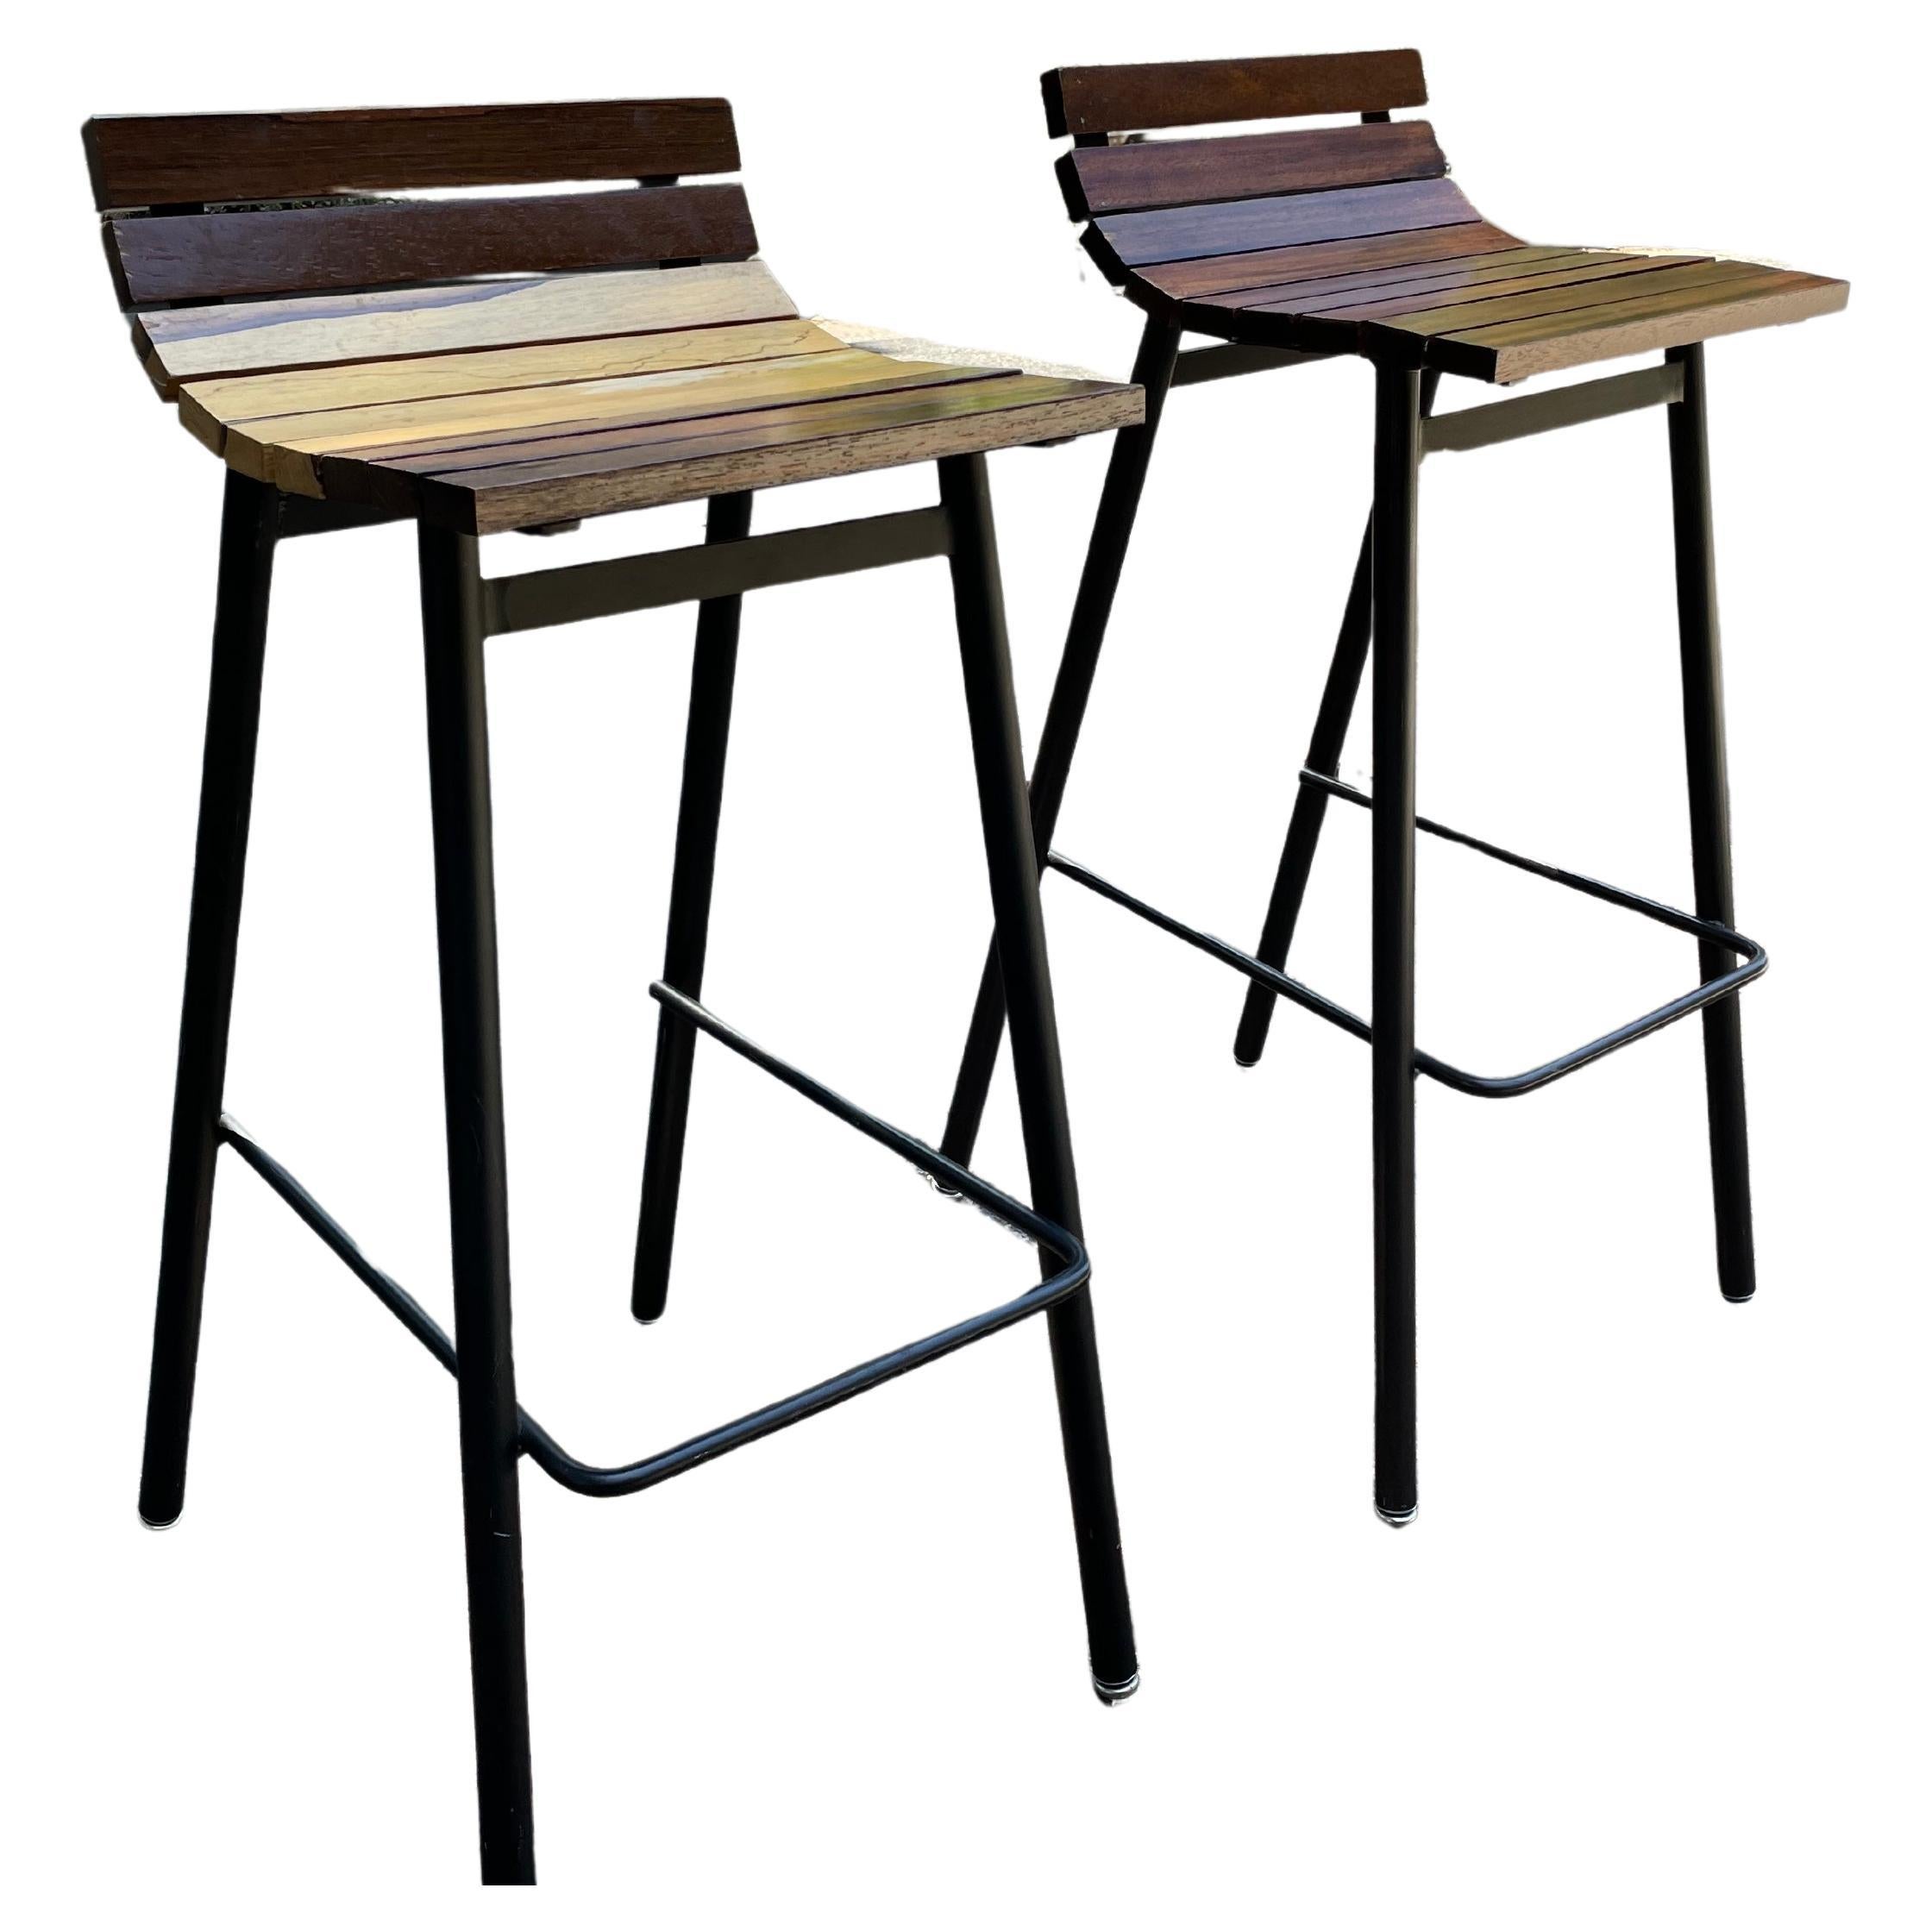 Iron Bar Stools by Vista of California – Set of 2 For Sale